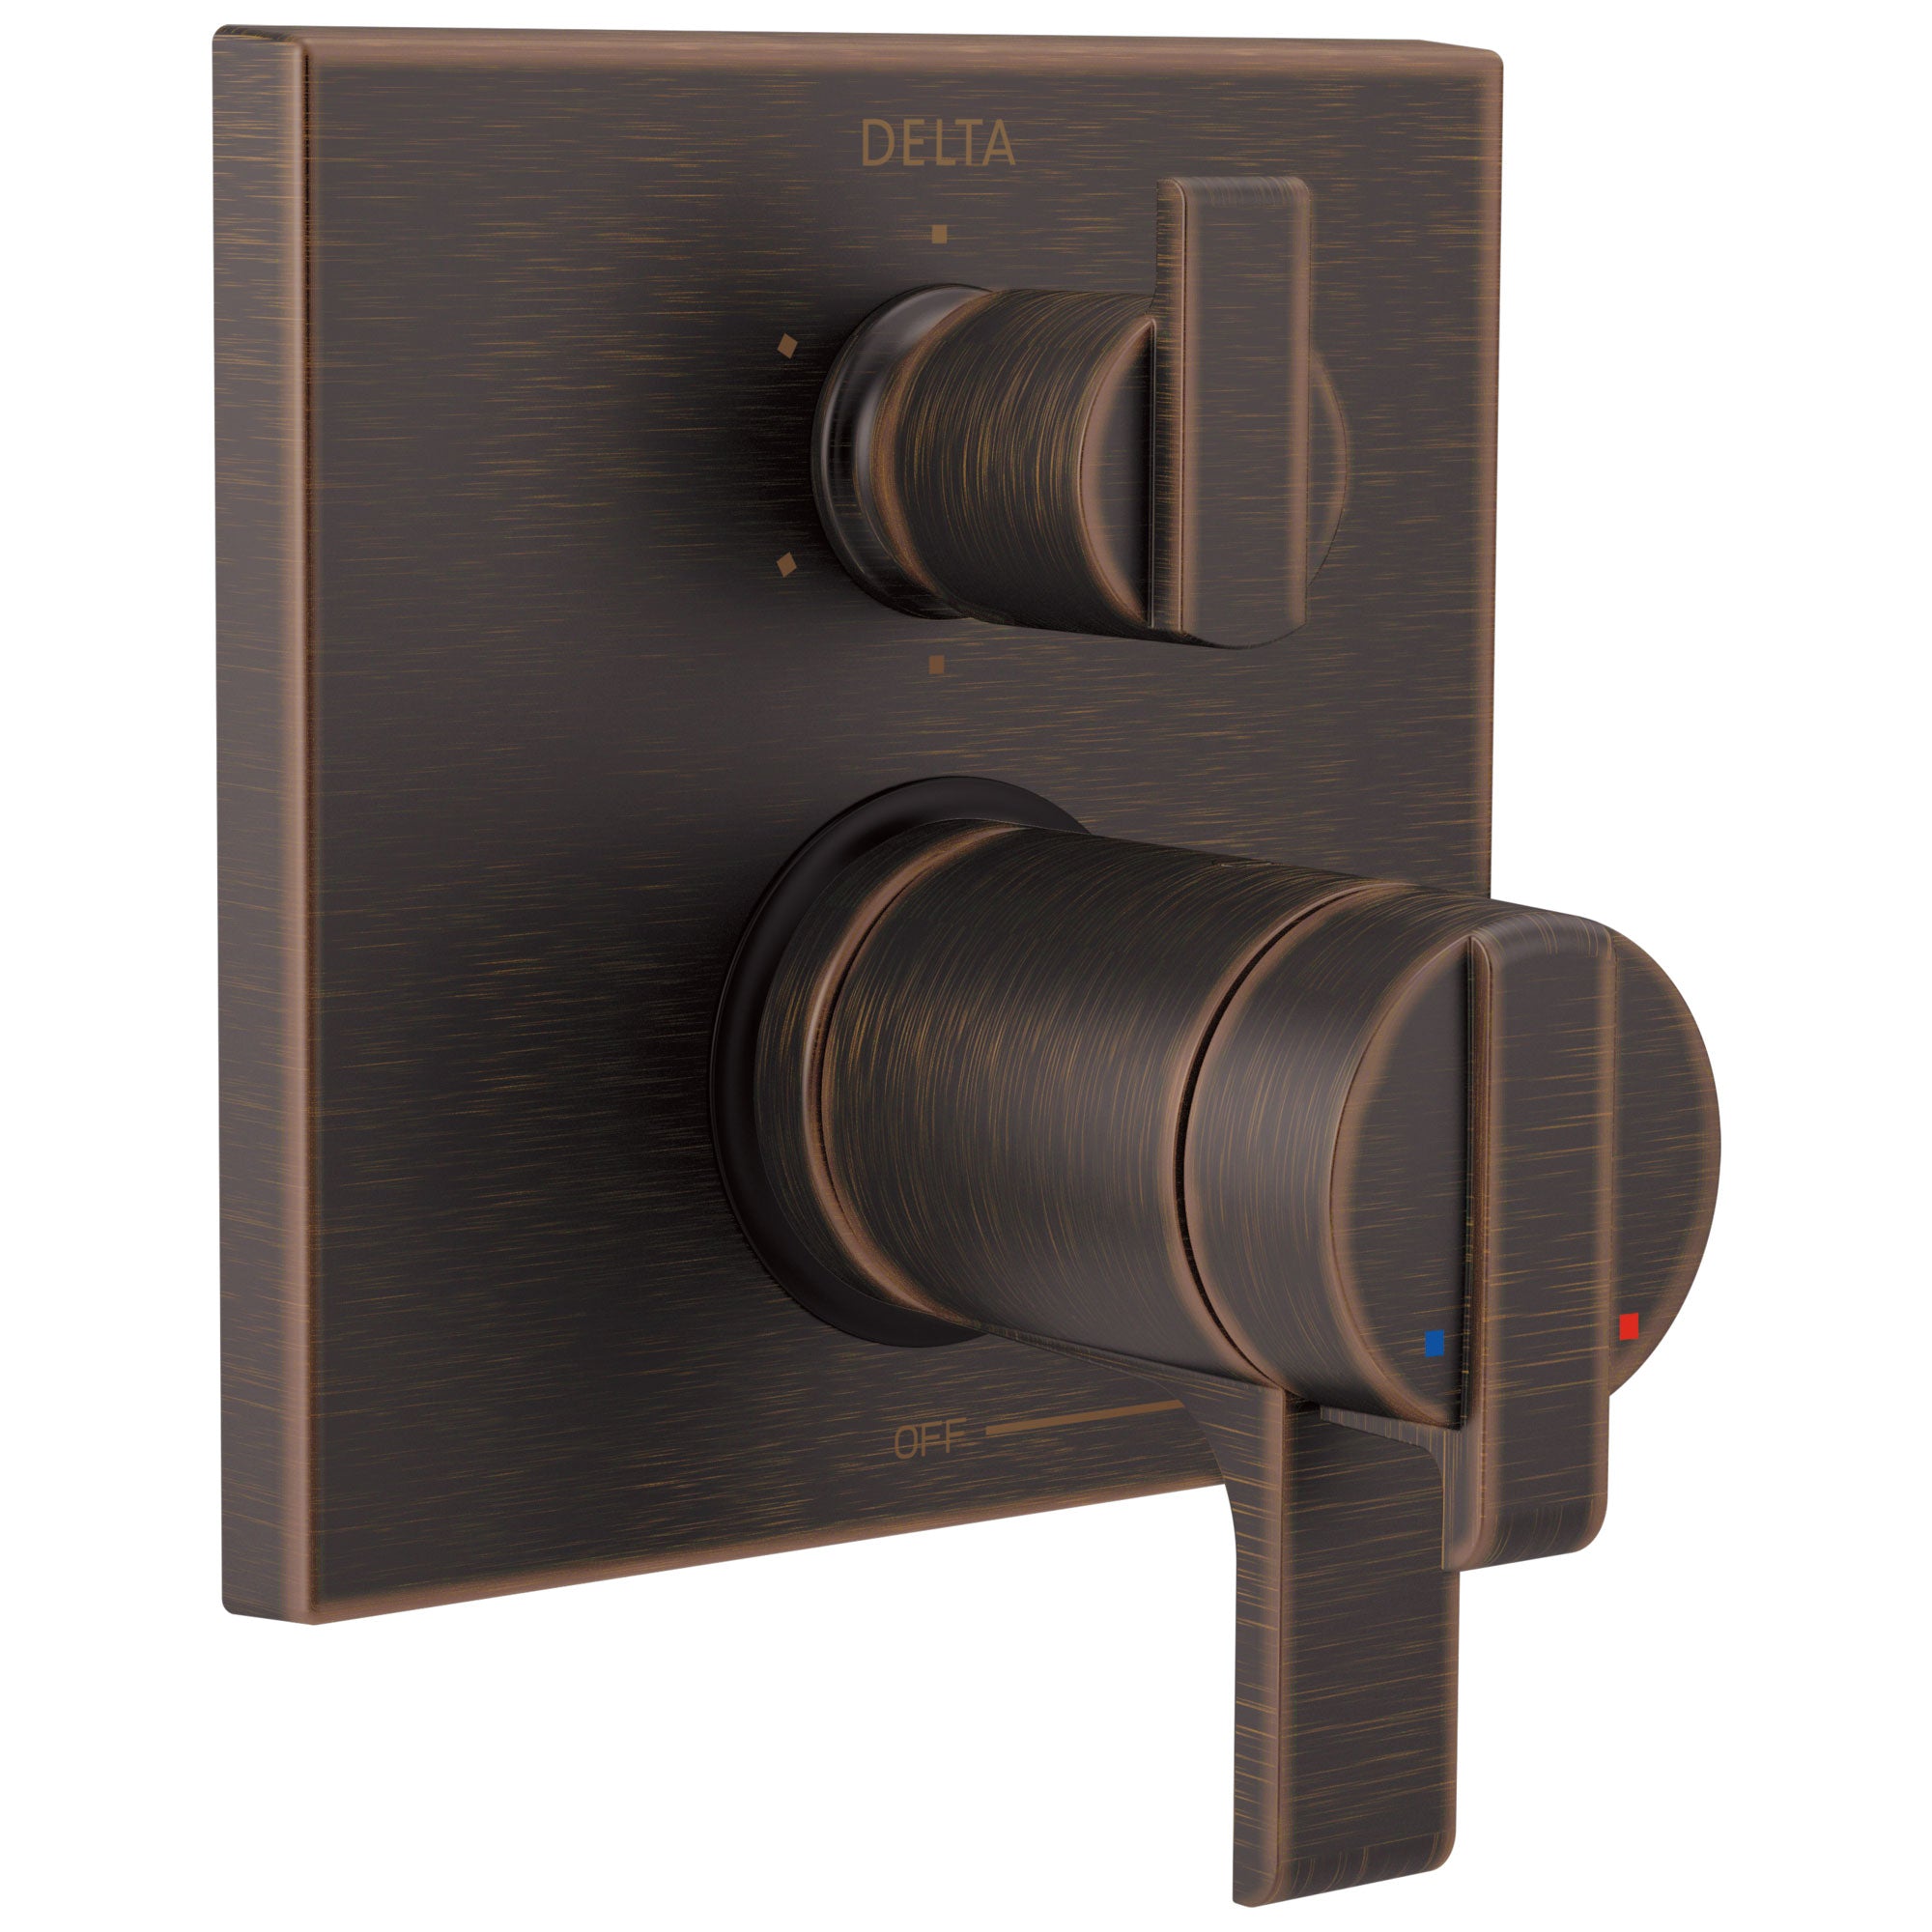 Delta Ara Collection Venetian Bronze Modern Thermostatic Shower Faucet Control with 6-Setting Integrated Diverter Trim (Requires Valve) DT27T967RB